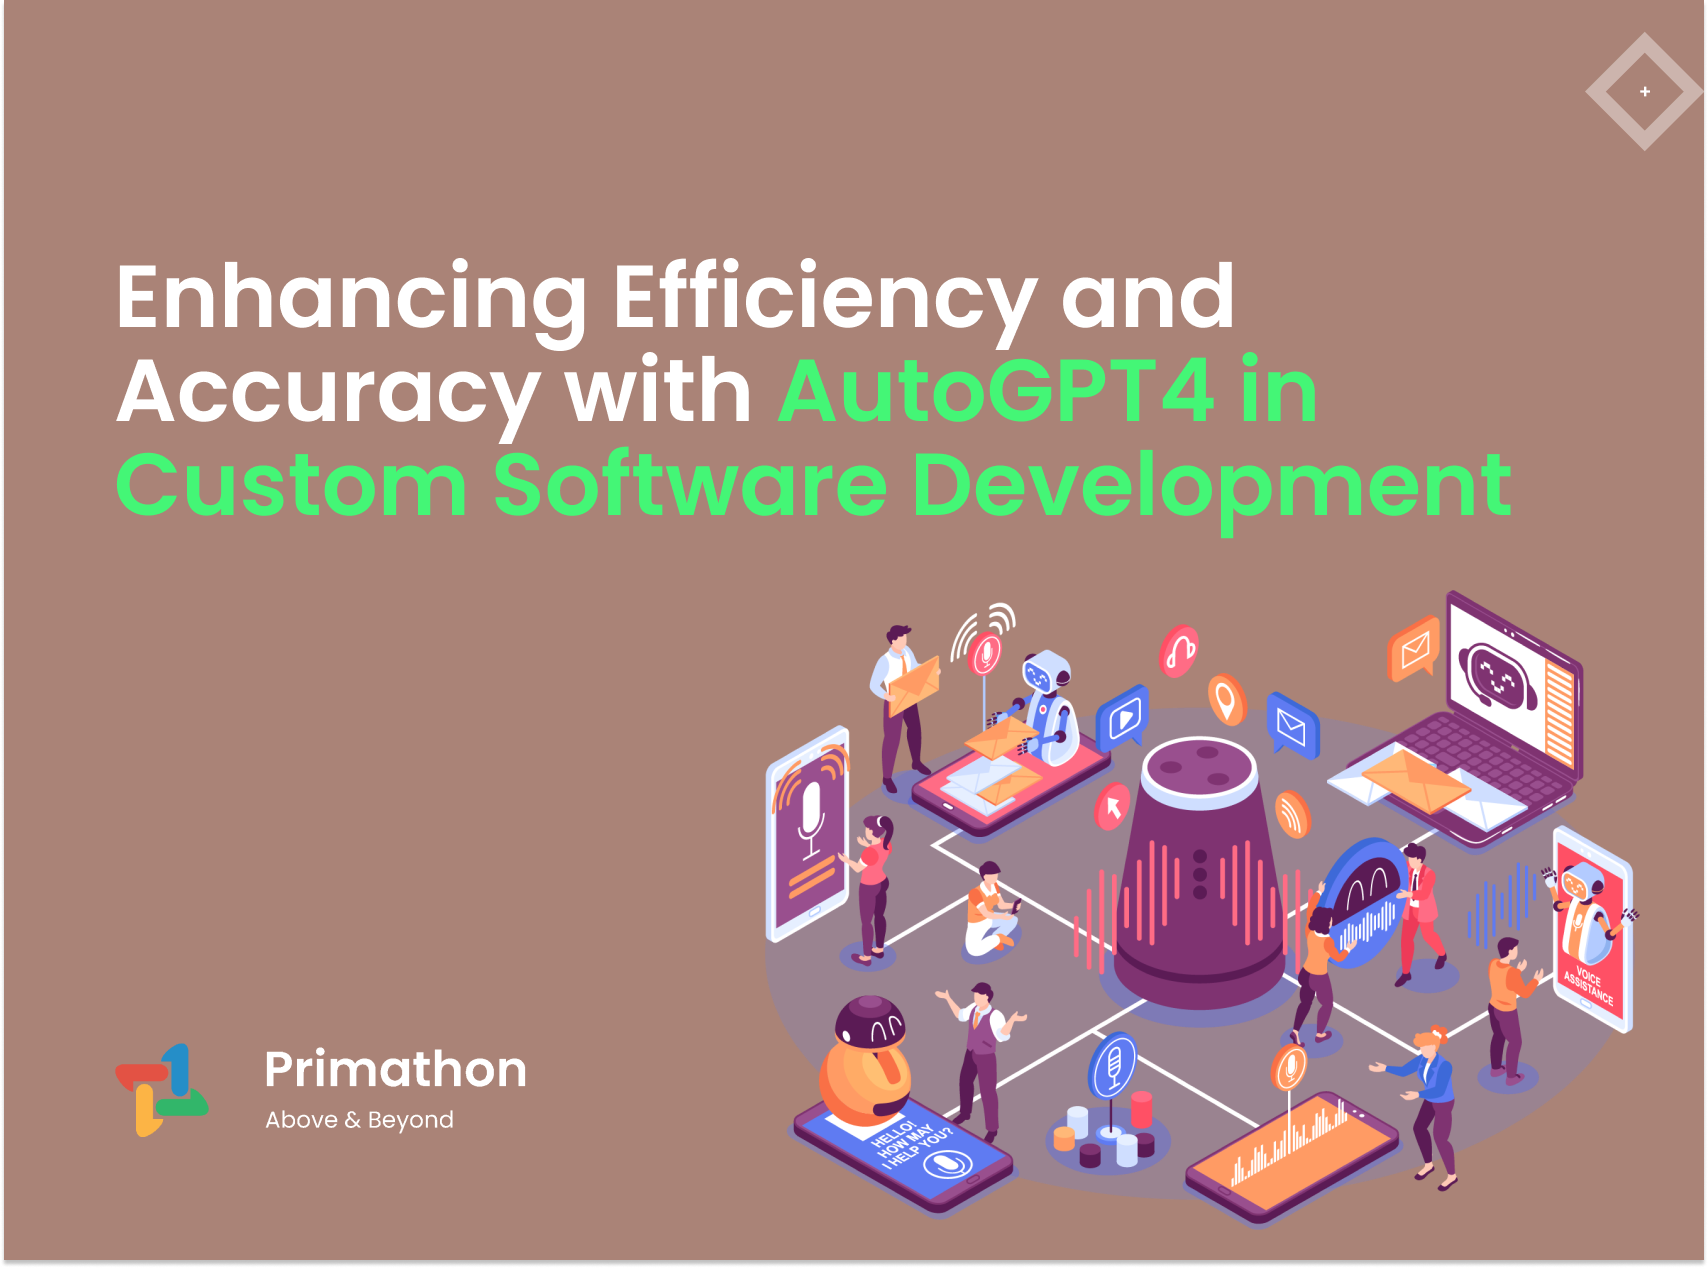 Enhancing Efficiency and Accuracy with AutoGPT4 in Custom Software Development